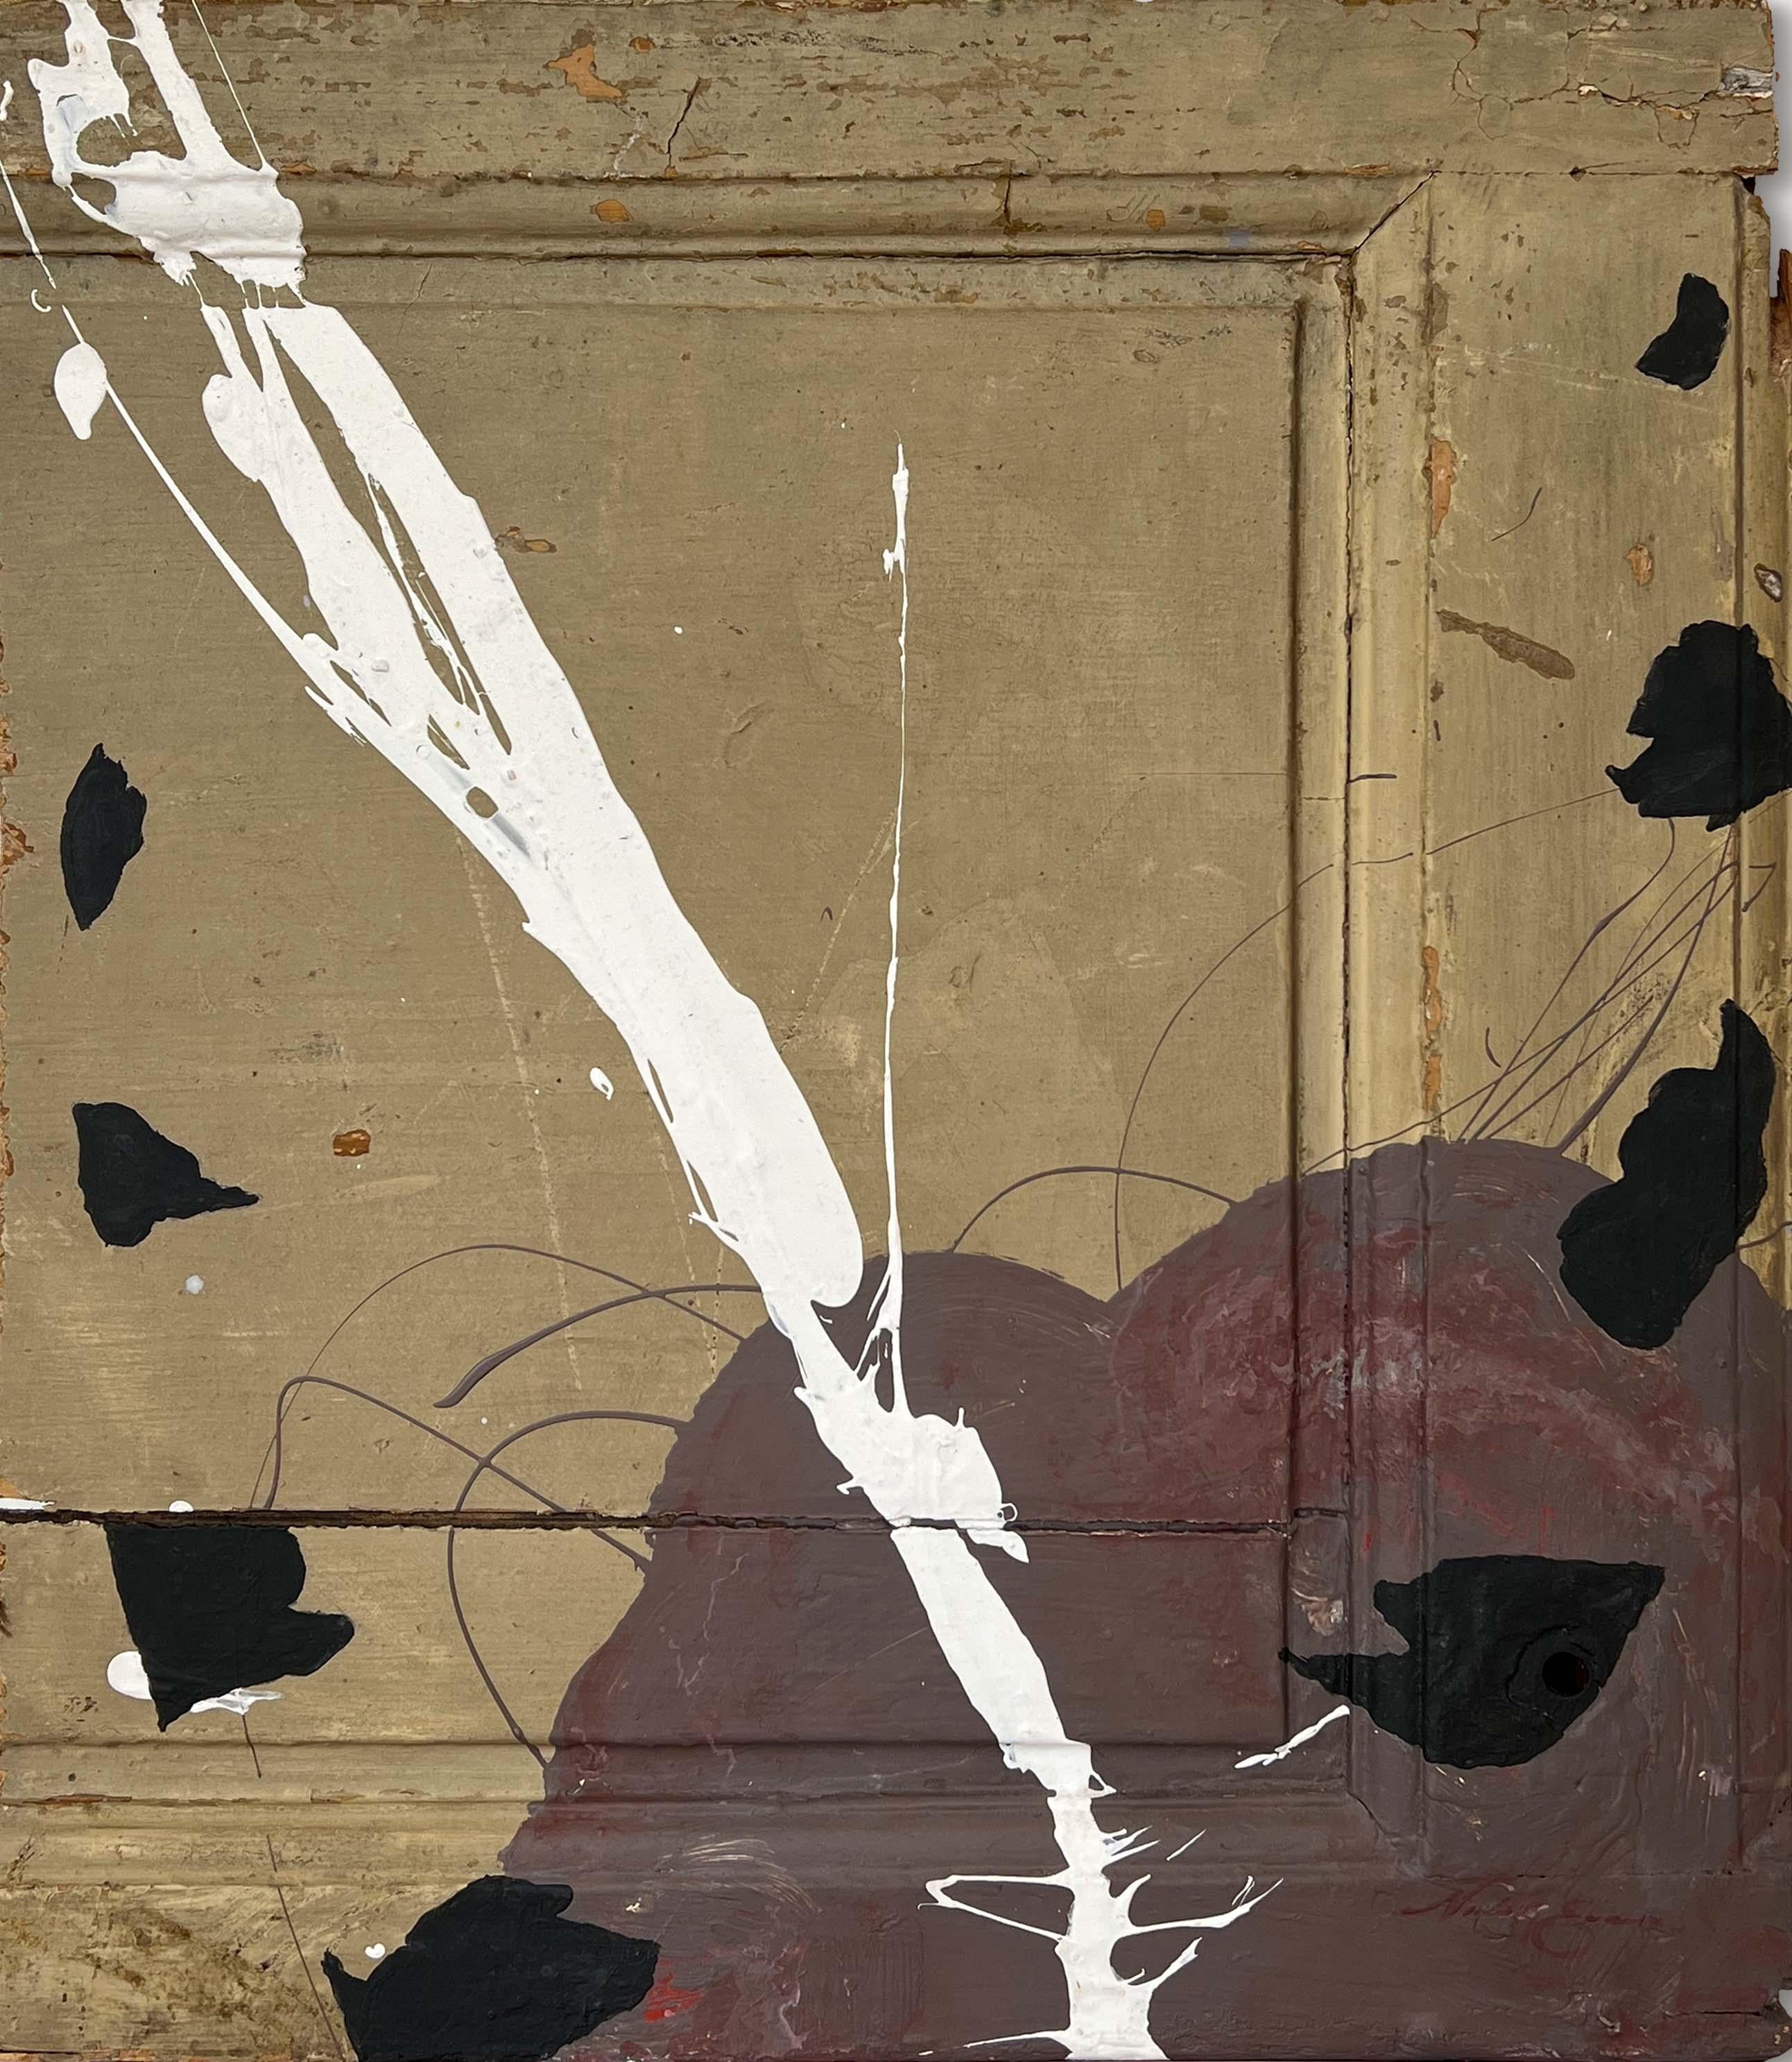 Nicholas Evans Abstract Painting - "SUTIV" (Abstract, Bold, Graphic, Neutral, Painting on Antique Wood Door)